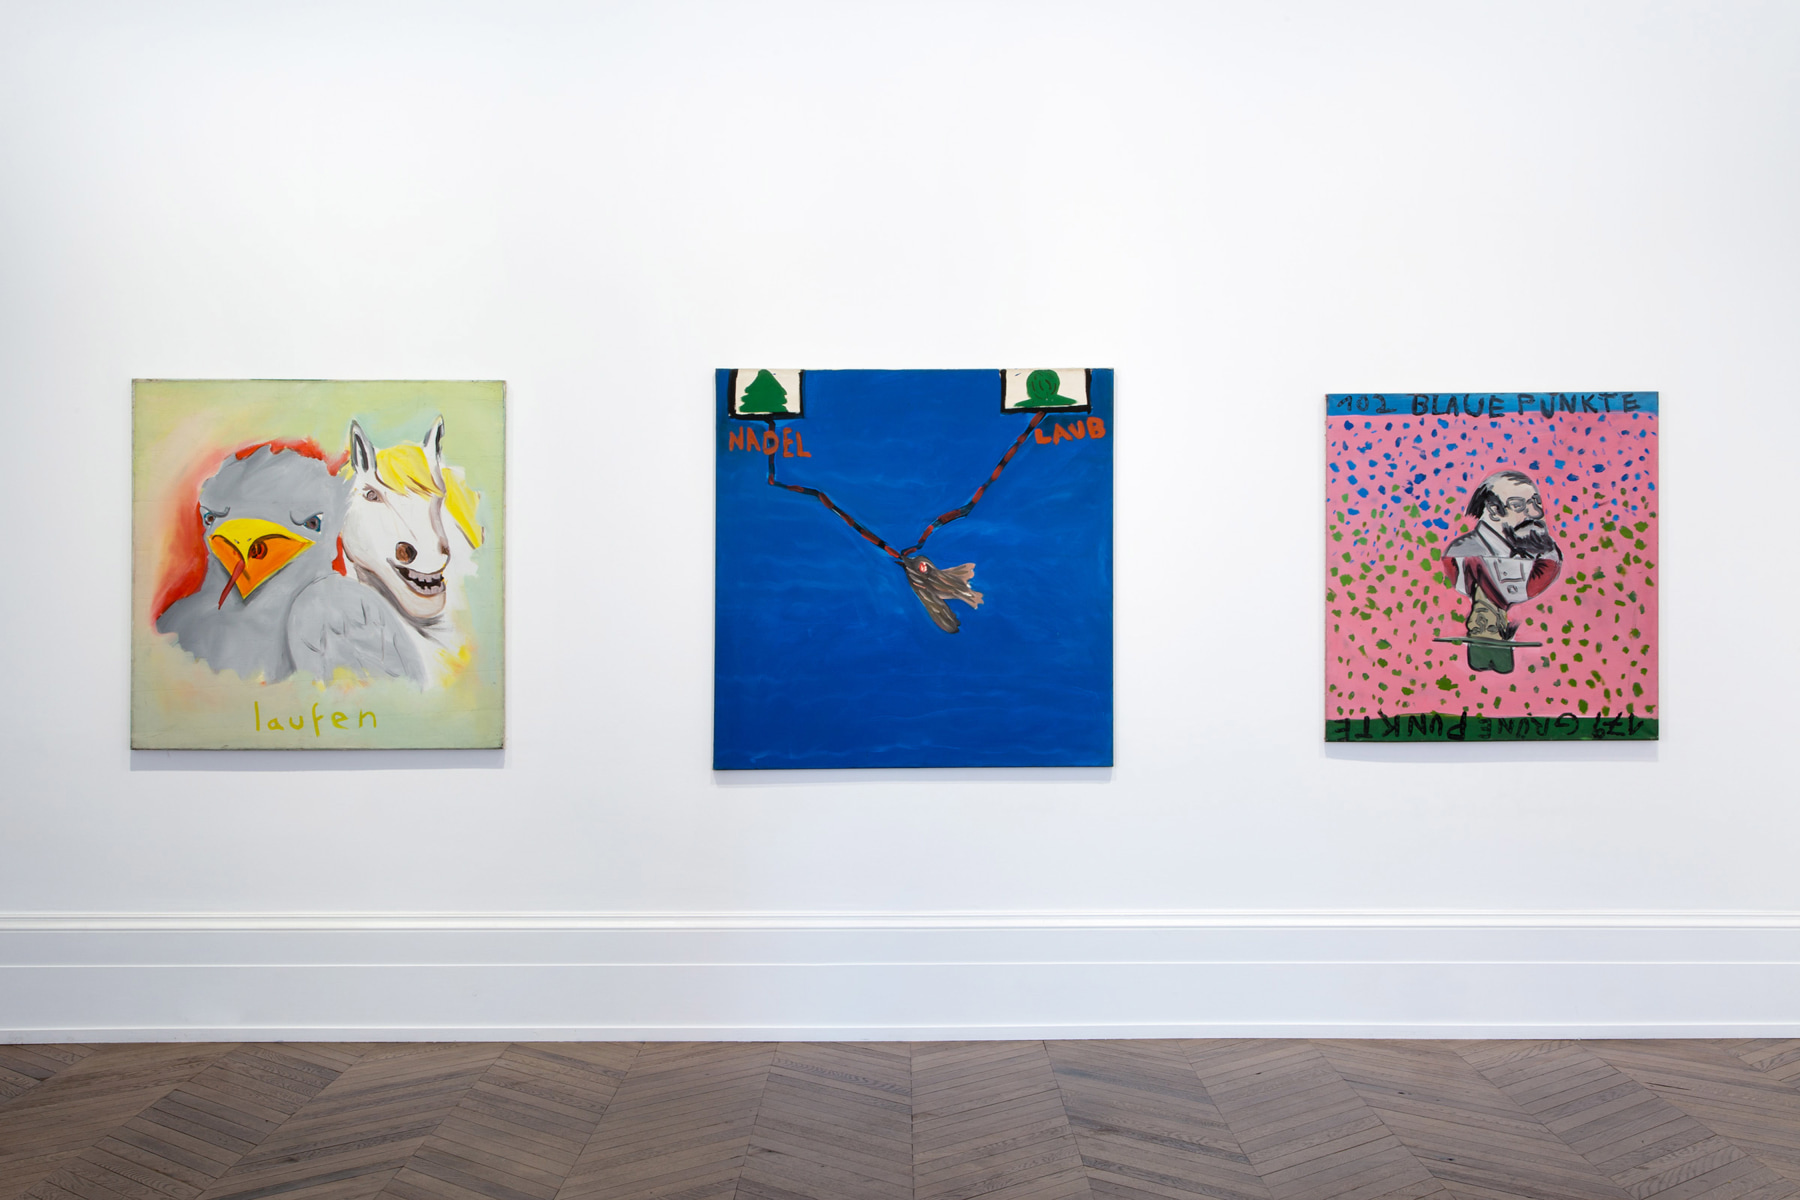 J&Ouml;RG IMMENDORFF LIDL Works and Performances from the 60s and Late Paintings after Hogarth 12 May through 2 July 2016 MAYFAIR, LONDON, Installation View 8